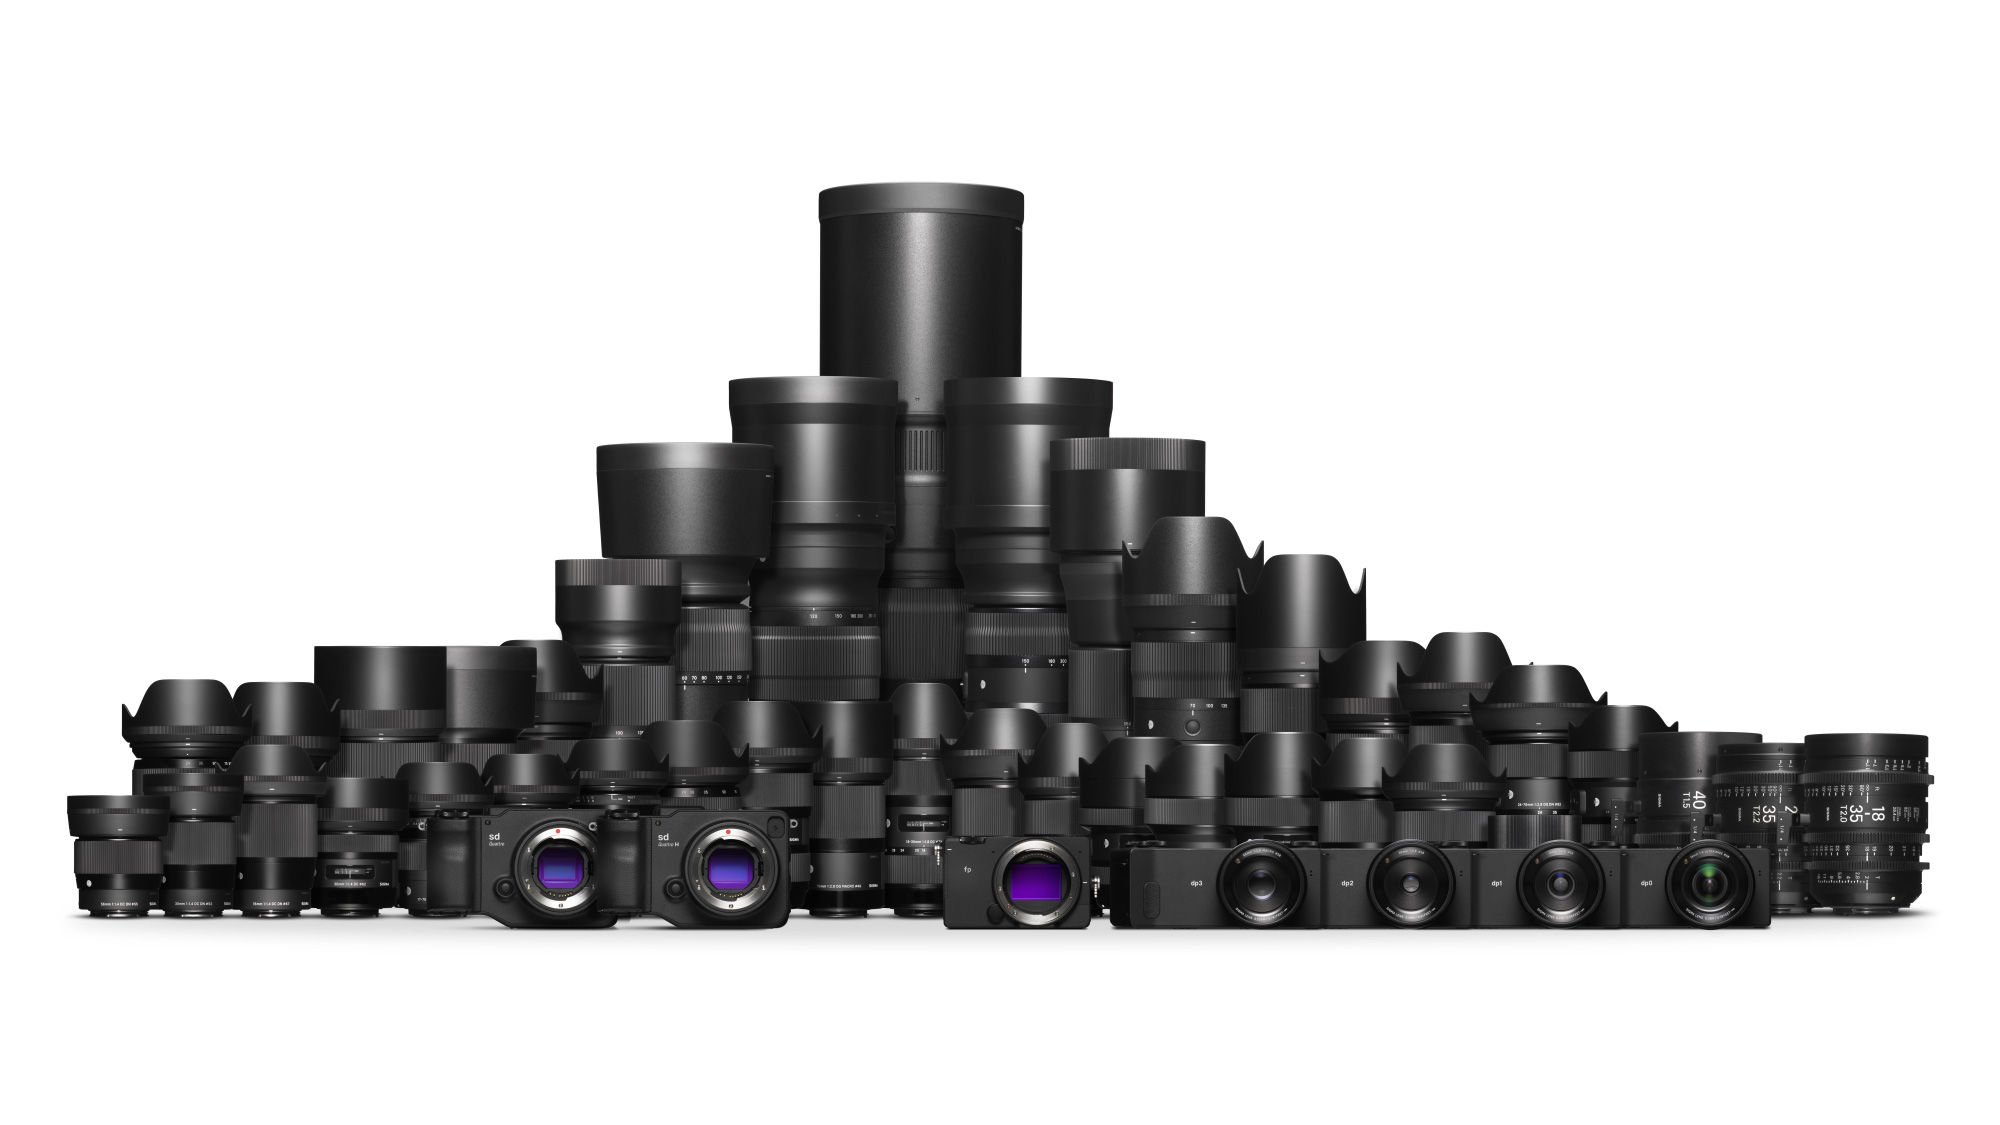 Which SIGMA Lenses Fit My Mirrorless Cameras and DSLRs?